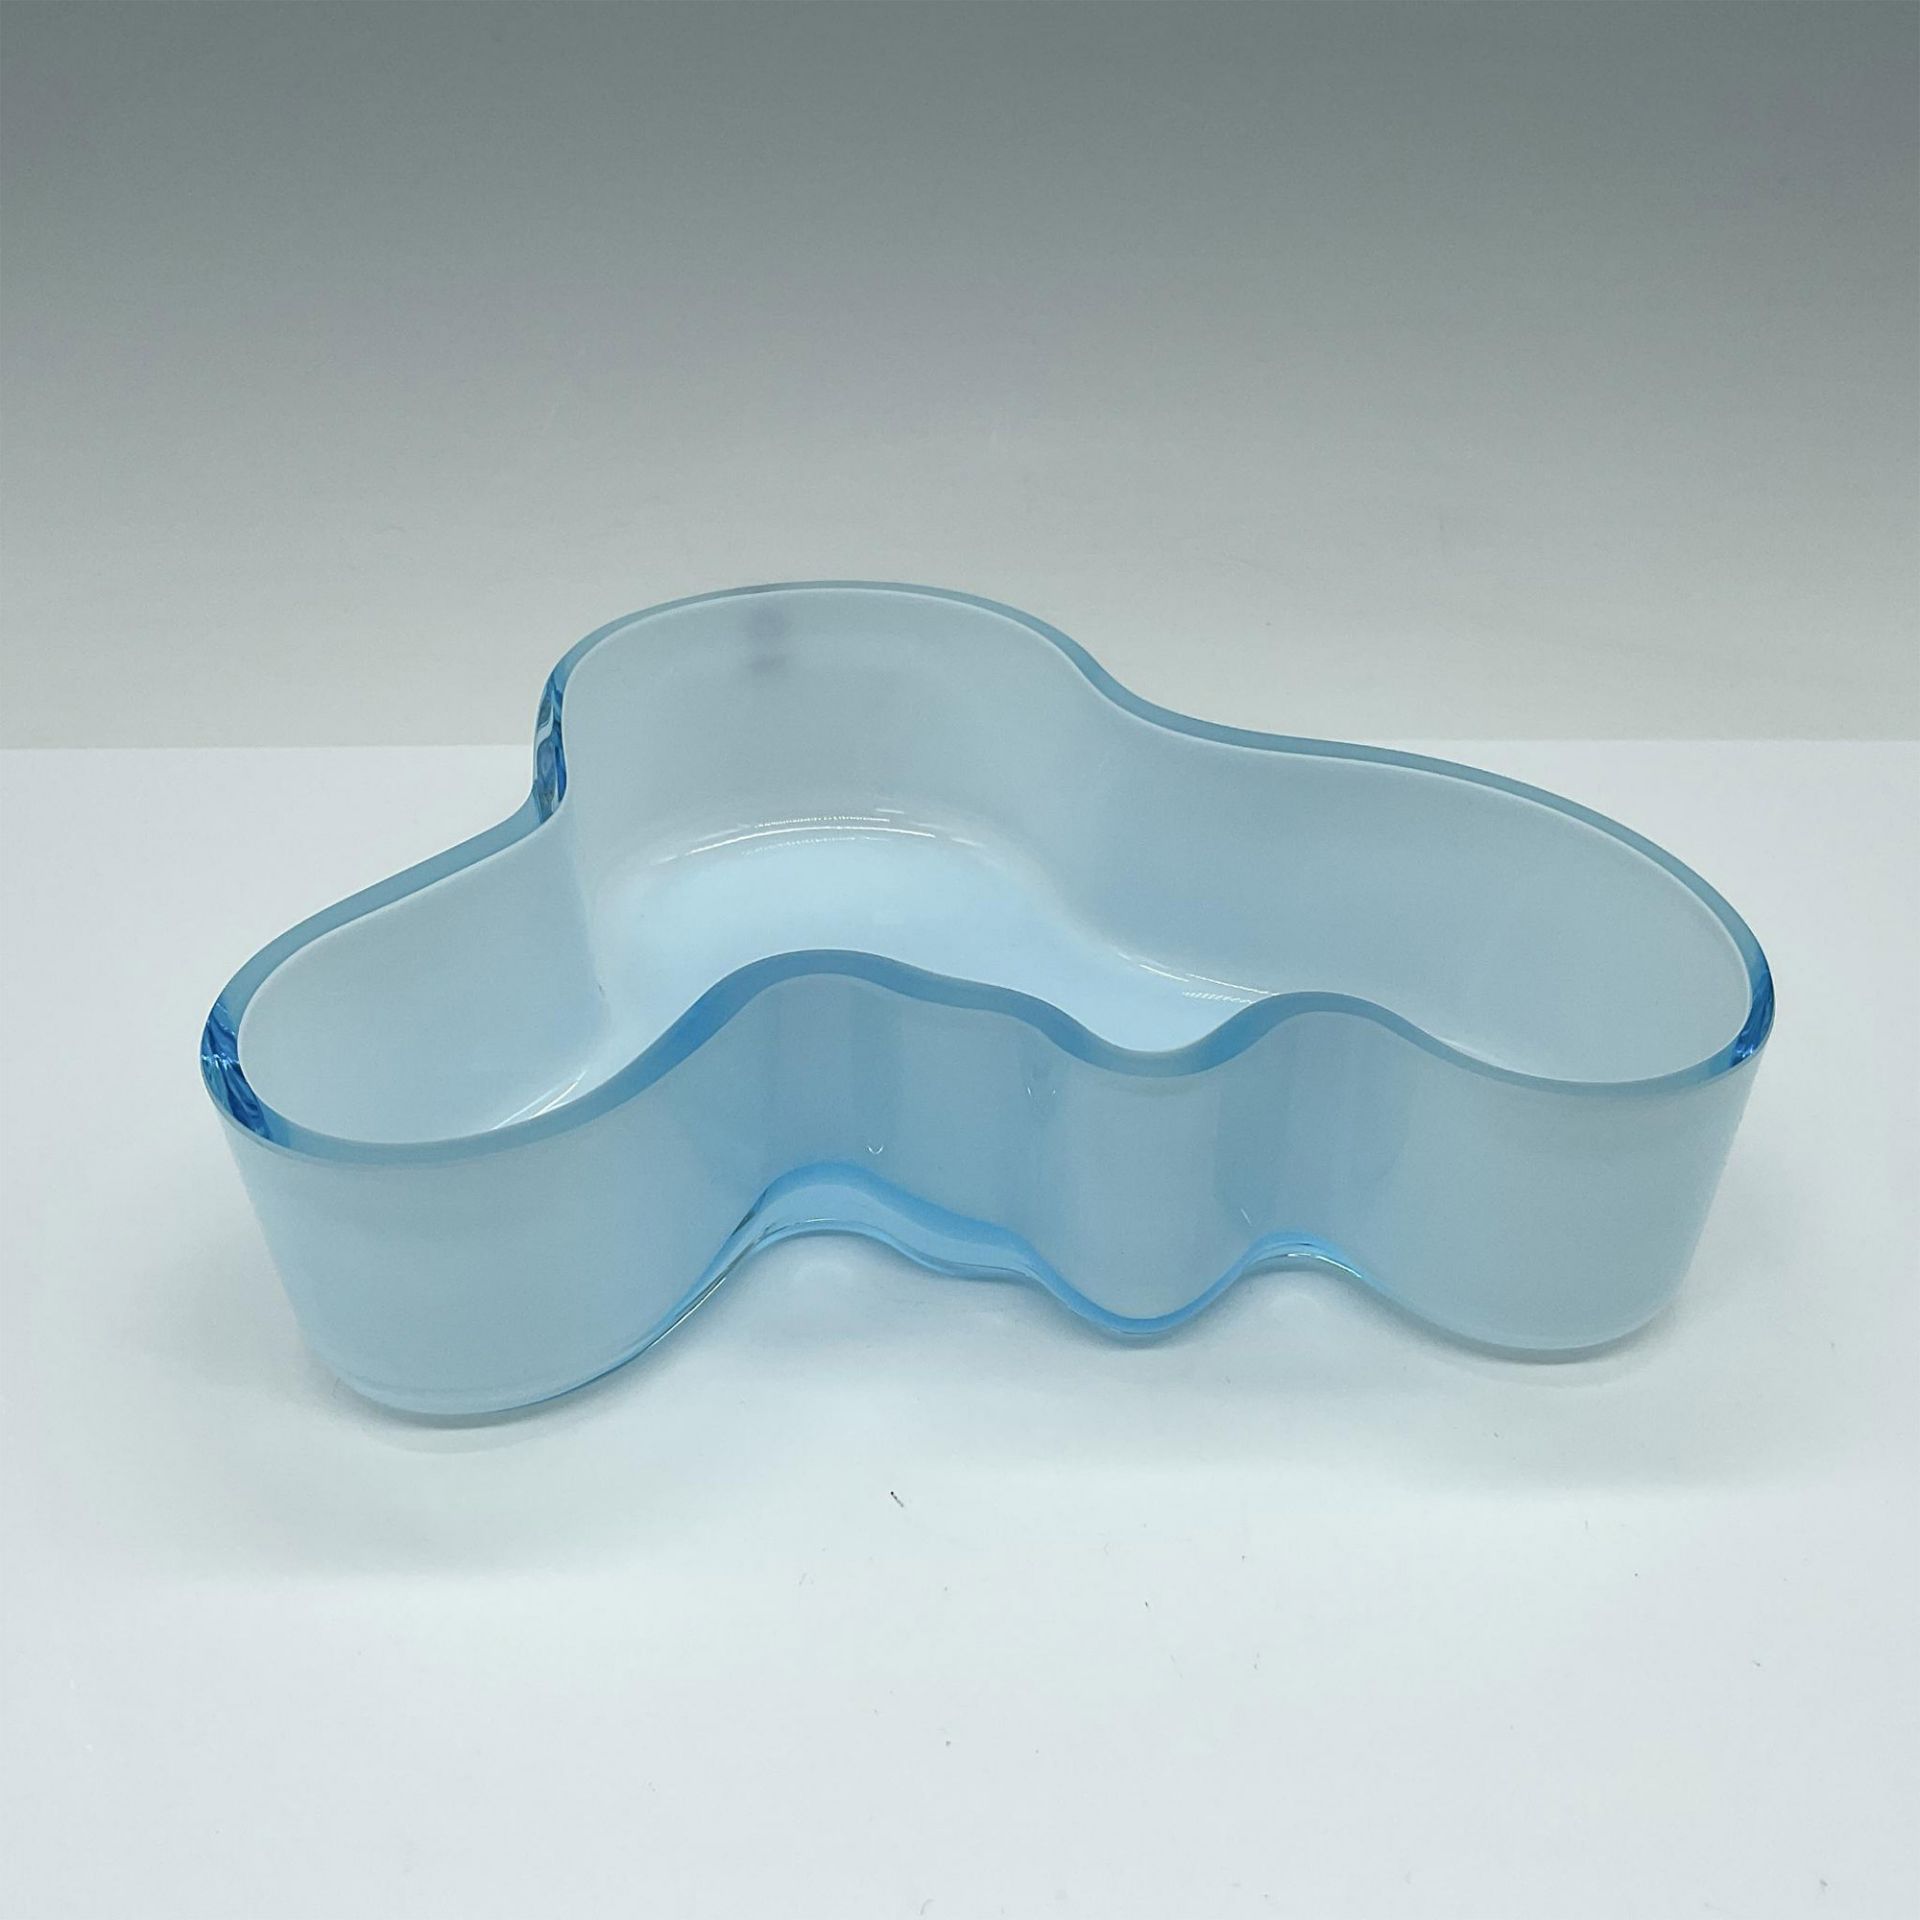 Iittala Blue and White Glass Bowl, Alvar Aalto Collection